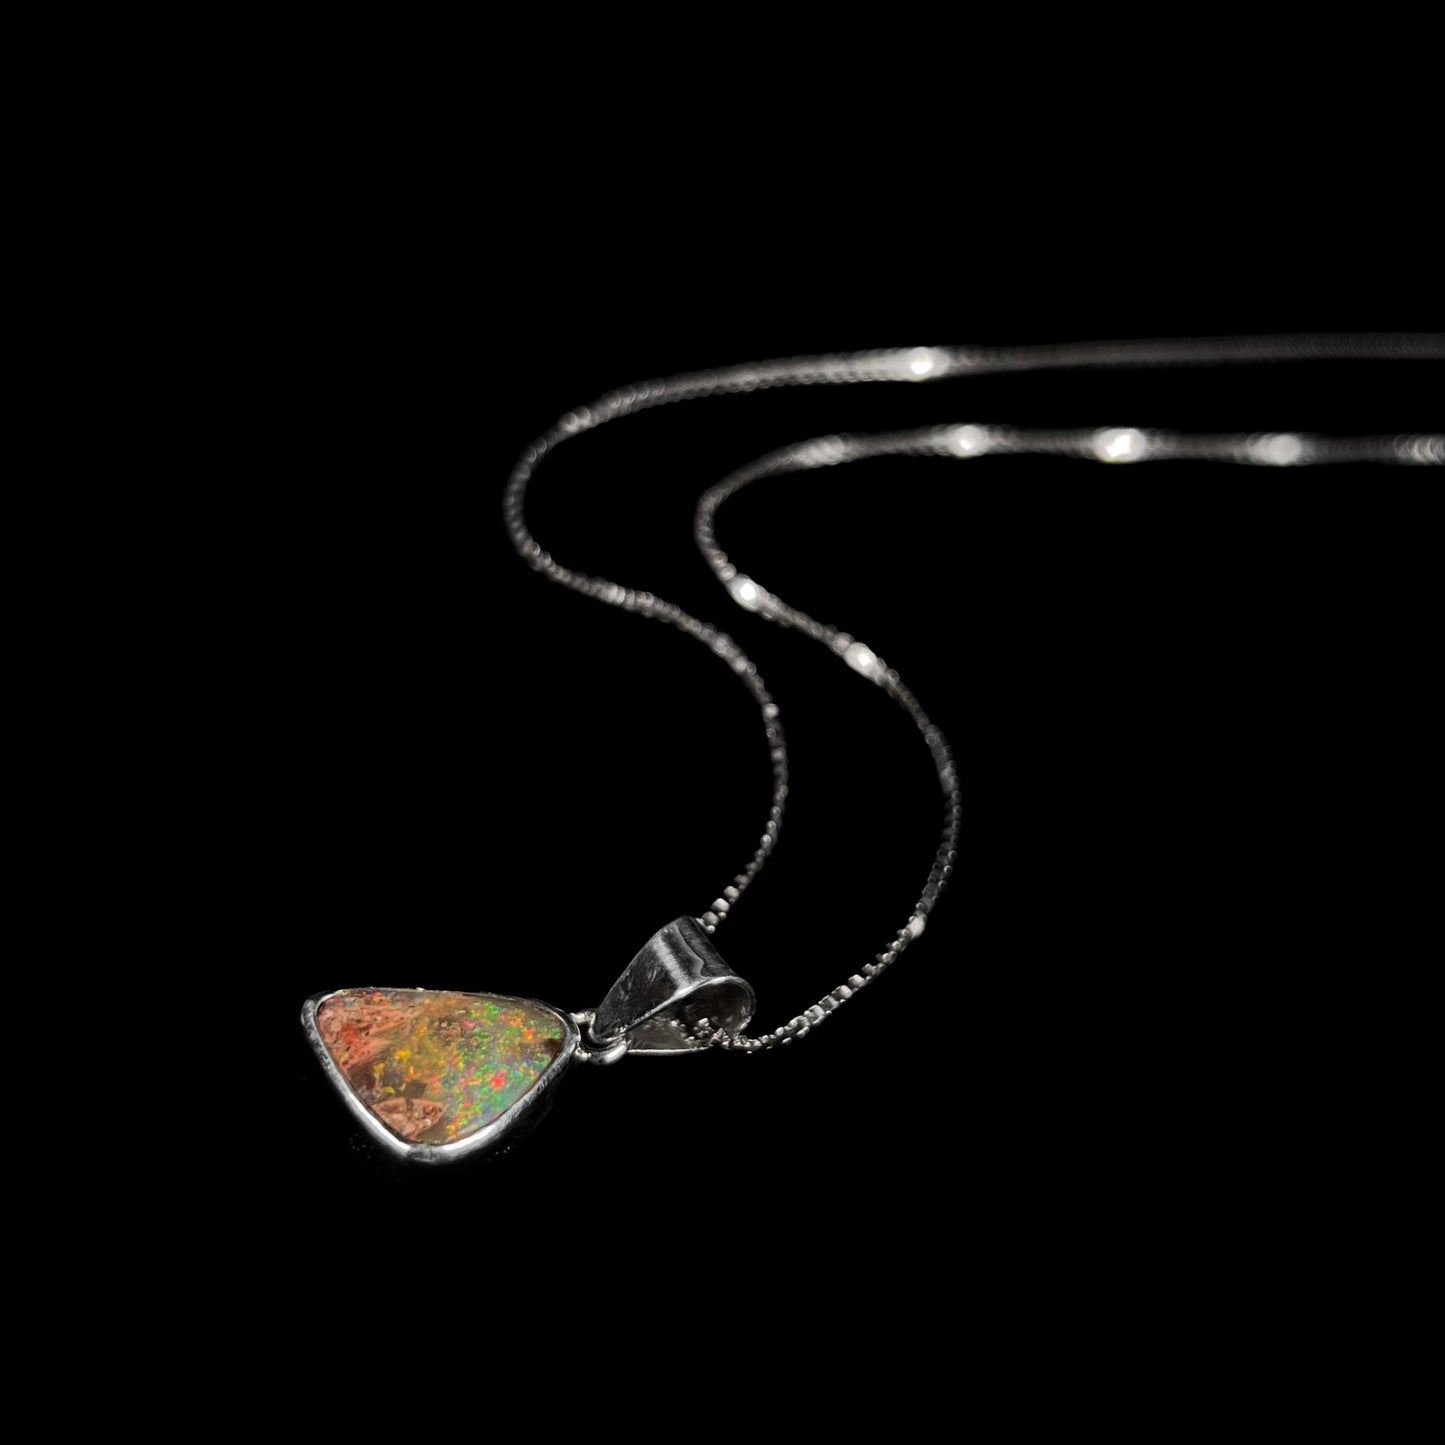 A sterling silver boulder opal necklace on a box chain.  The opal twinkles bright red, green, and blue colors.